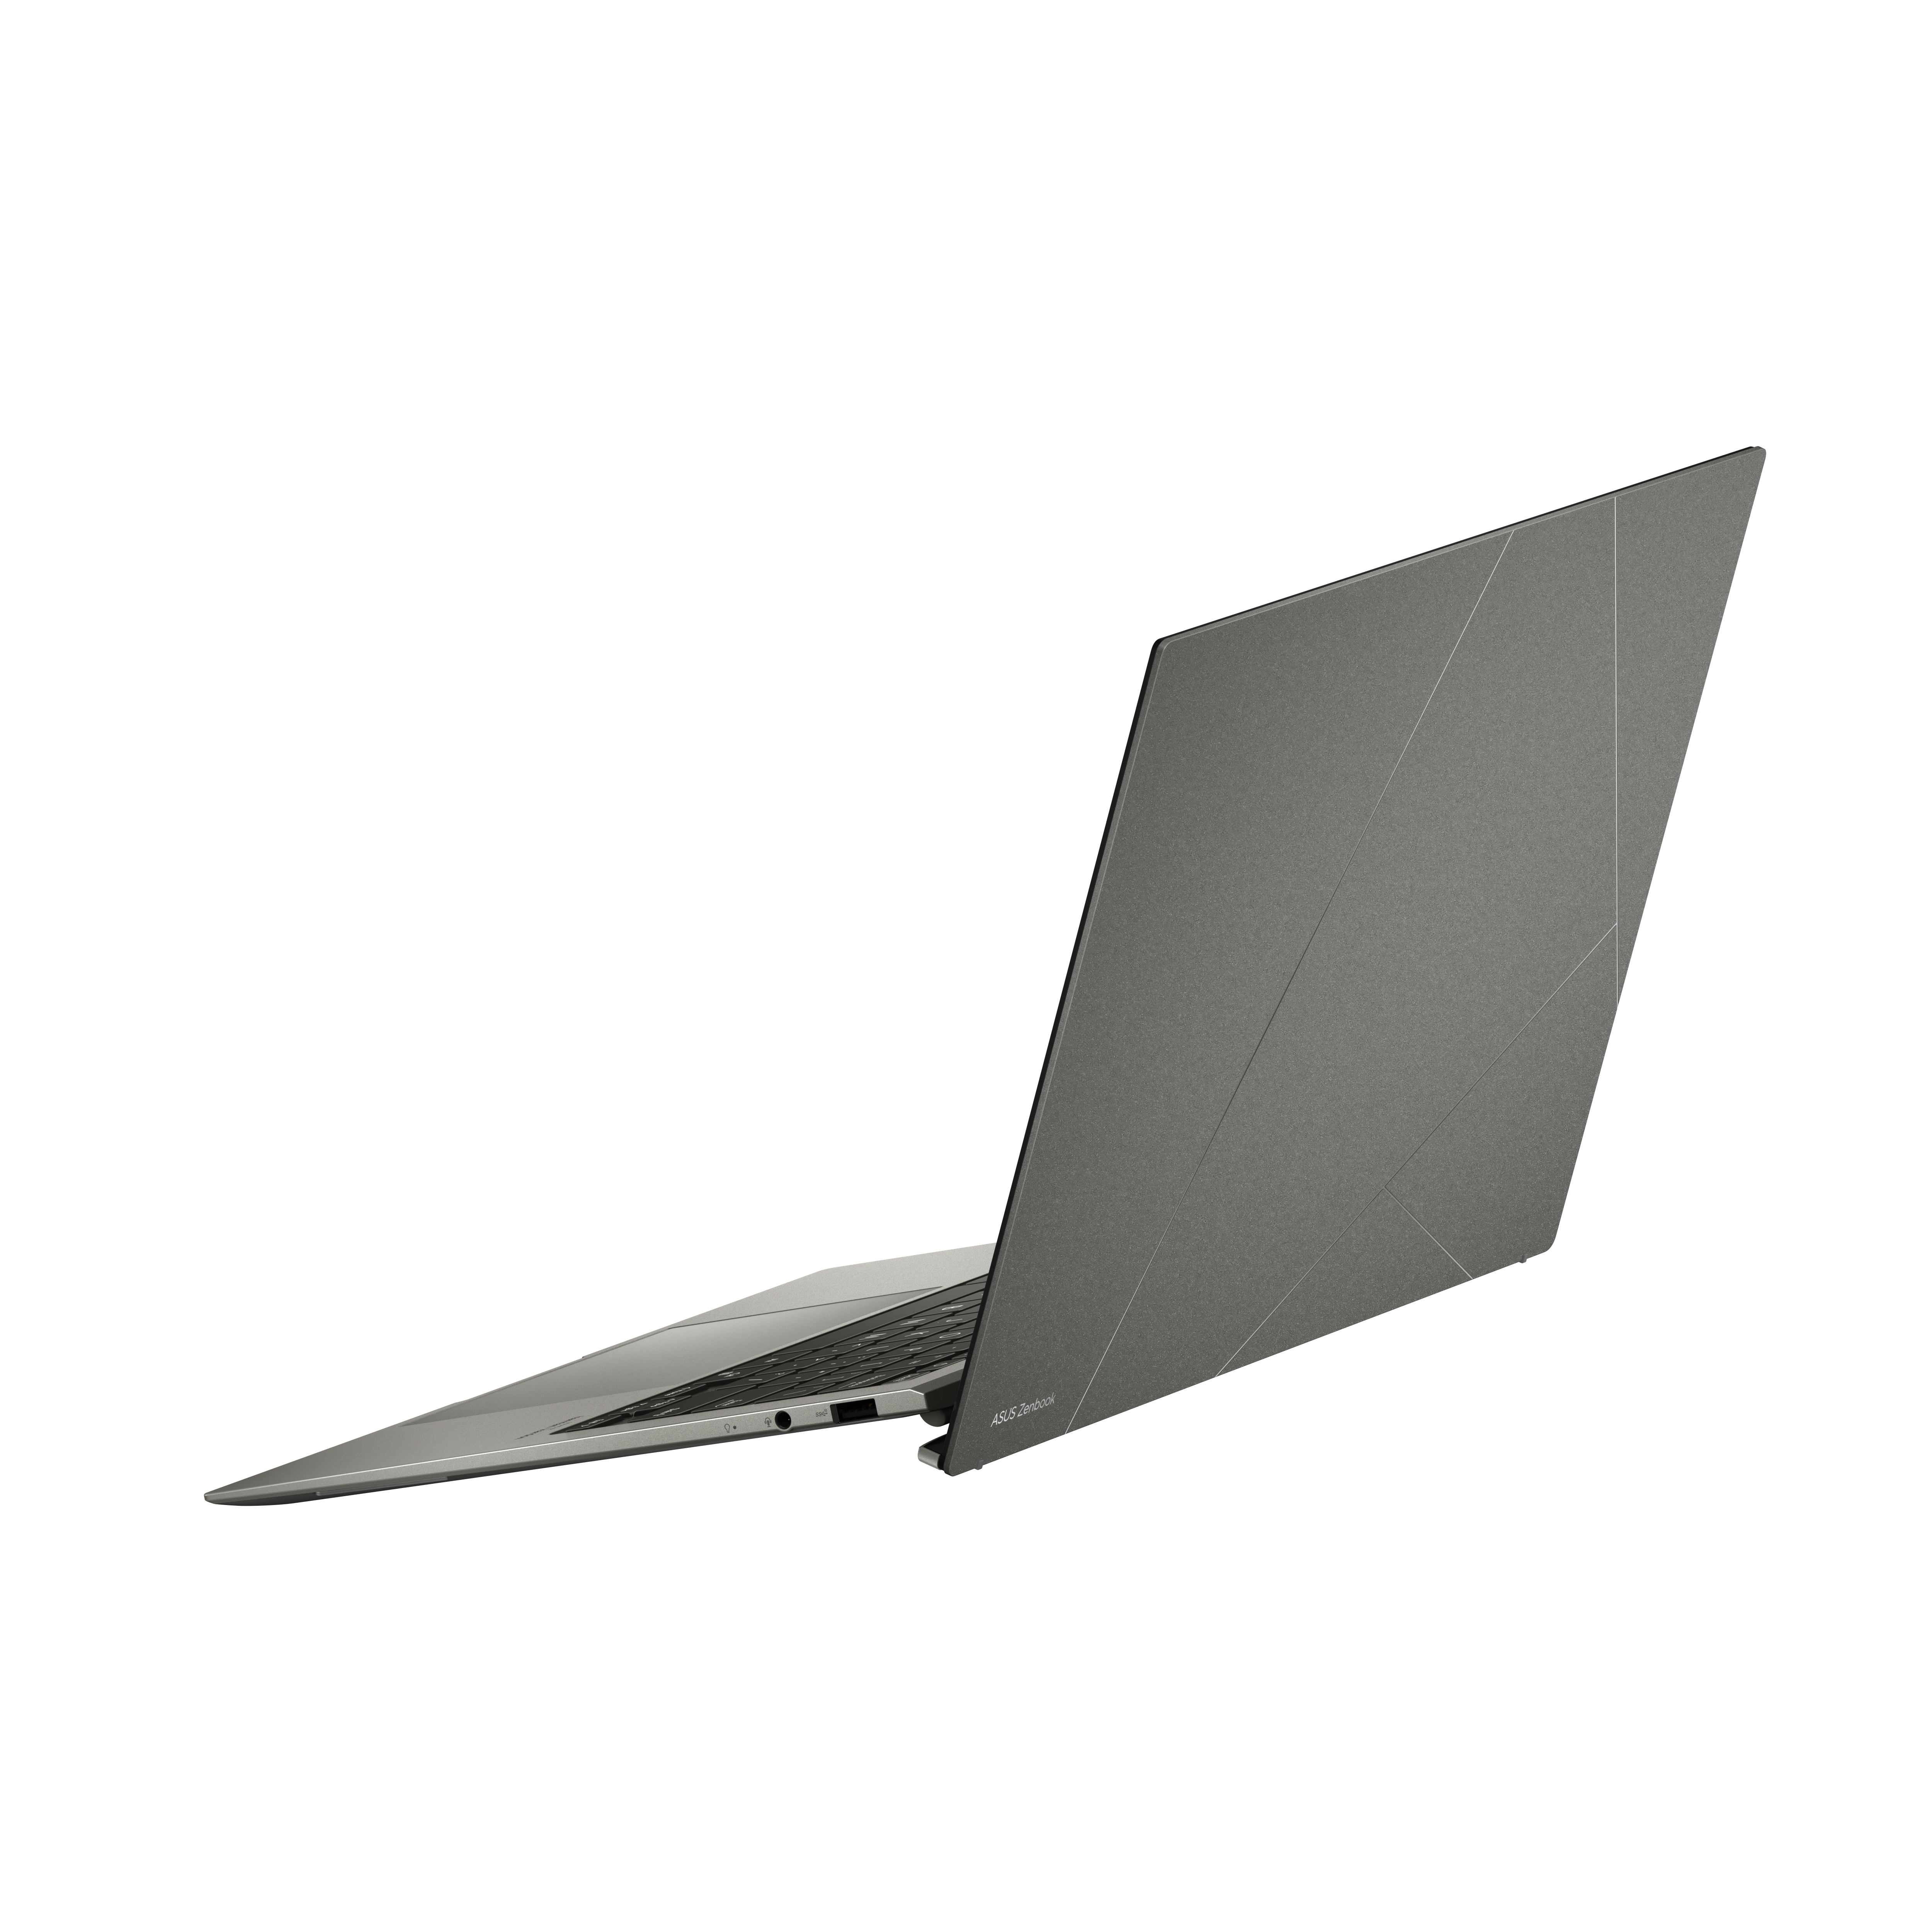 ASUS Zenbook S 13 OLED will be the smallest and most compact laptop in its history